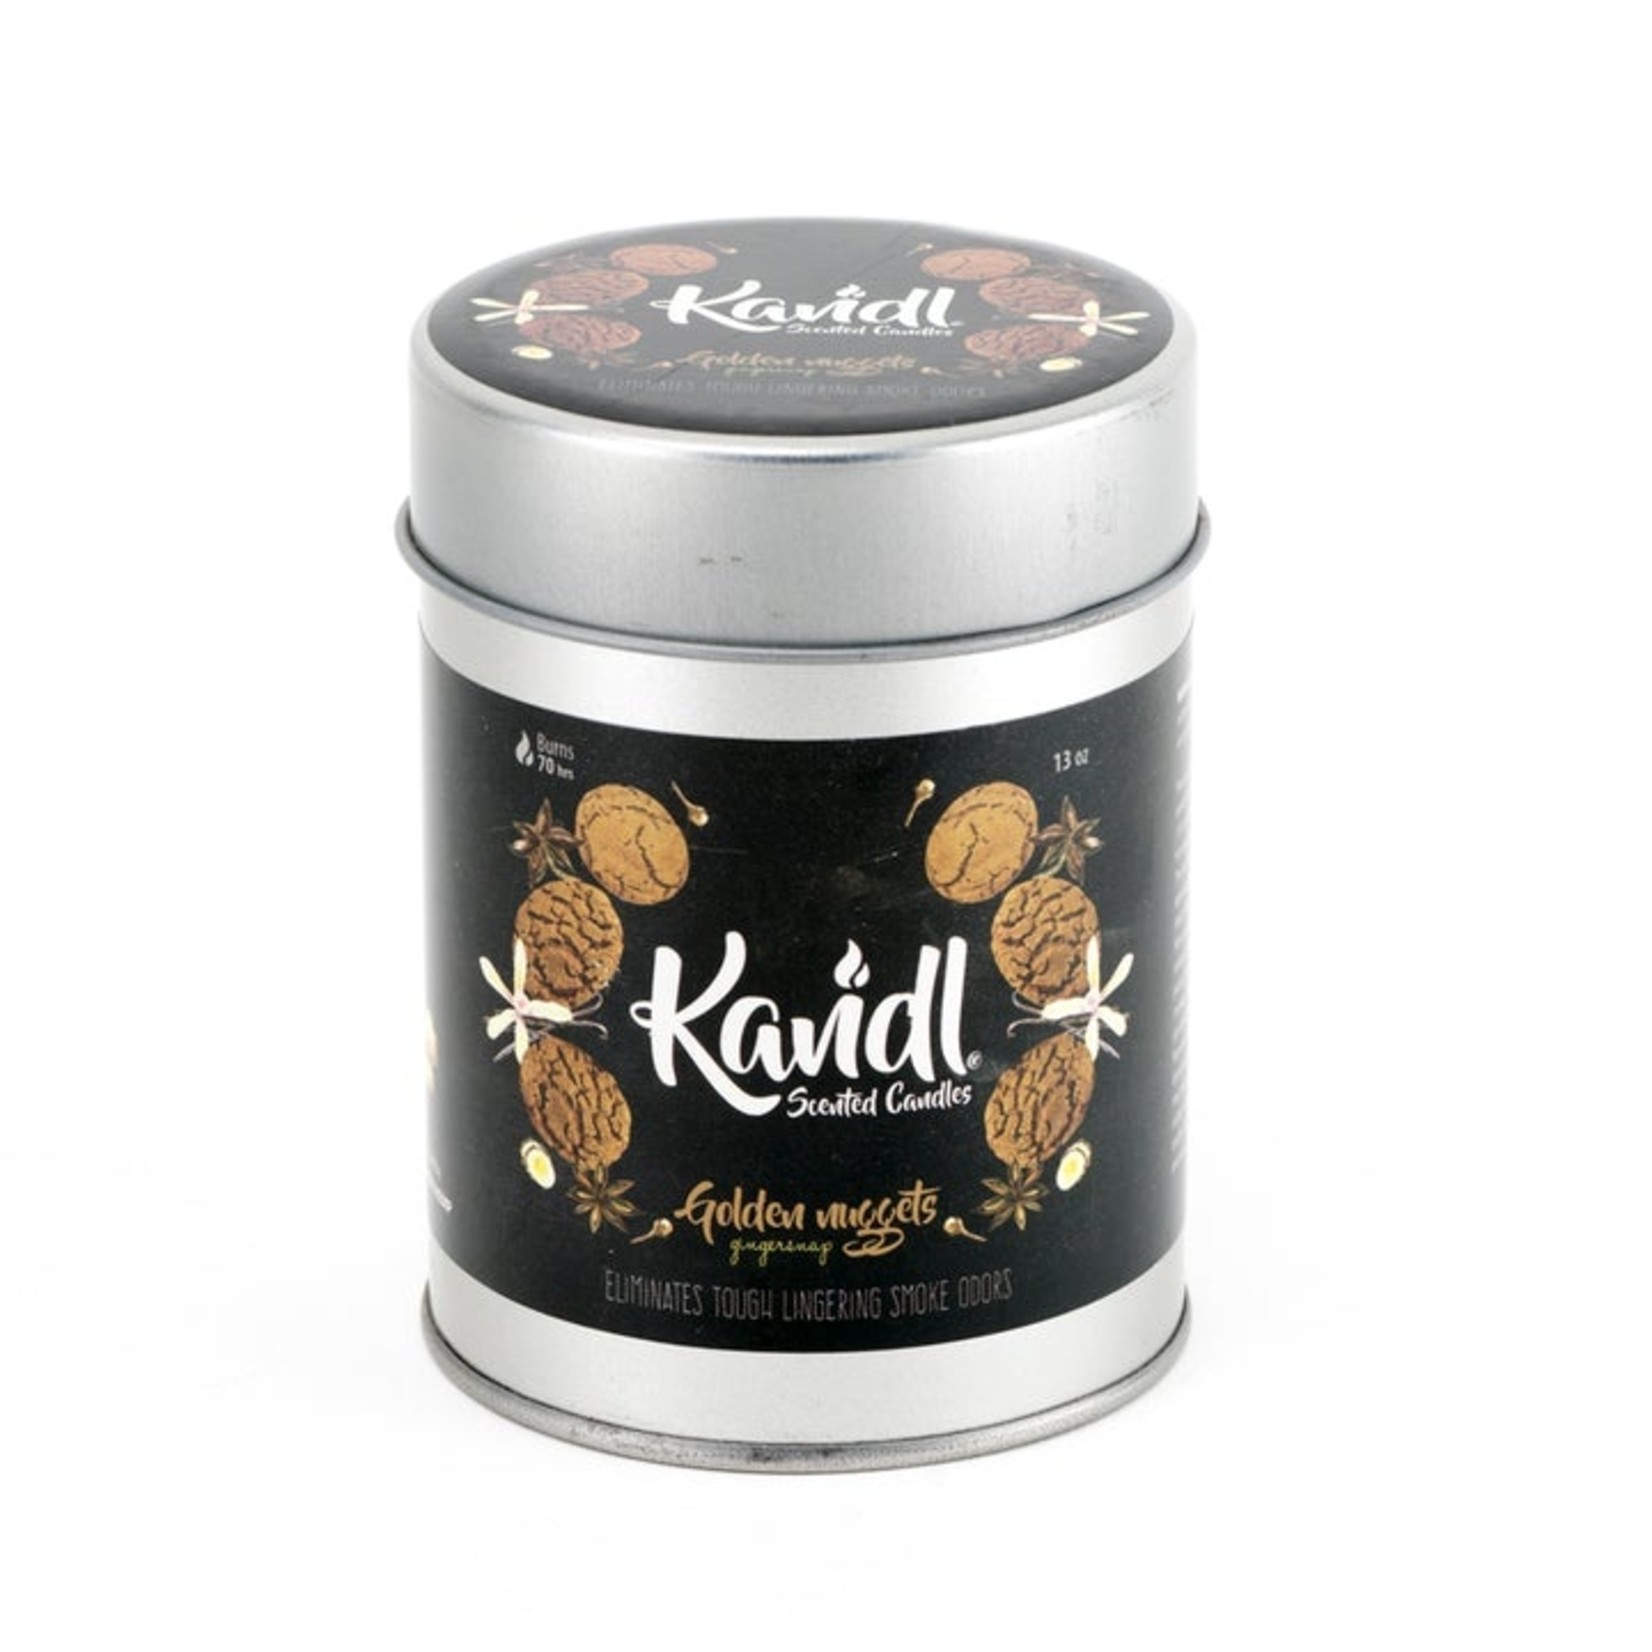 KANDL SCENTED CANDLES GOLDEN NUGGETS GINGERSNAP